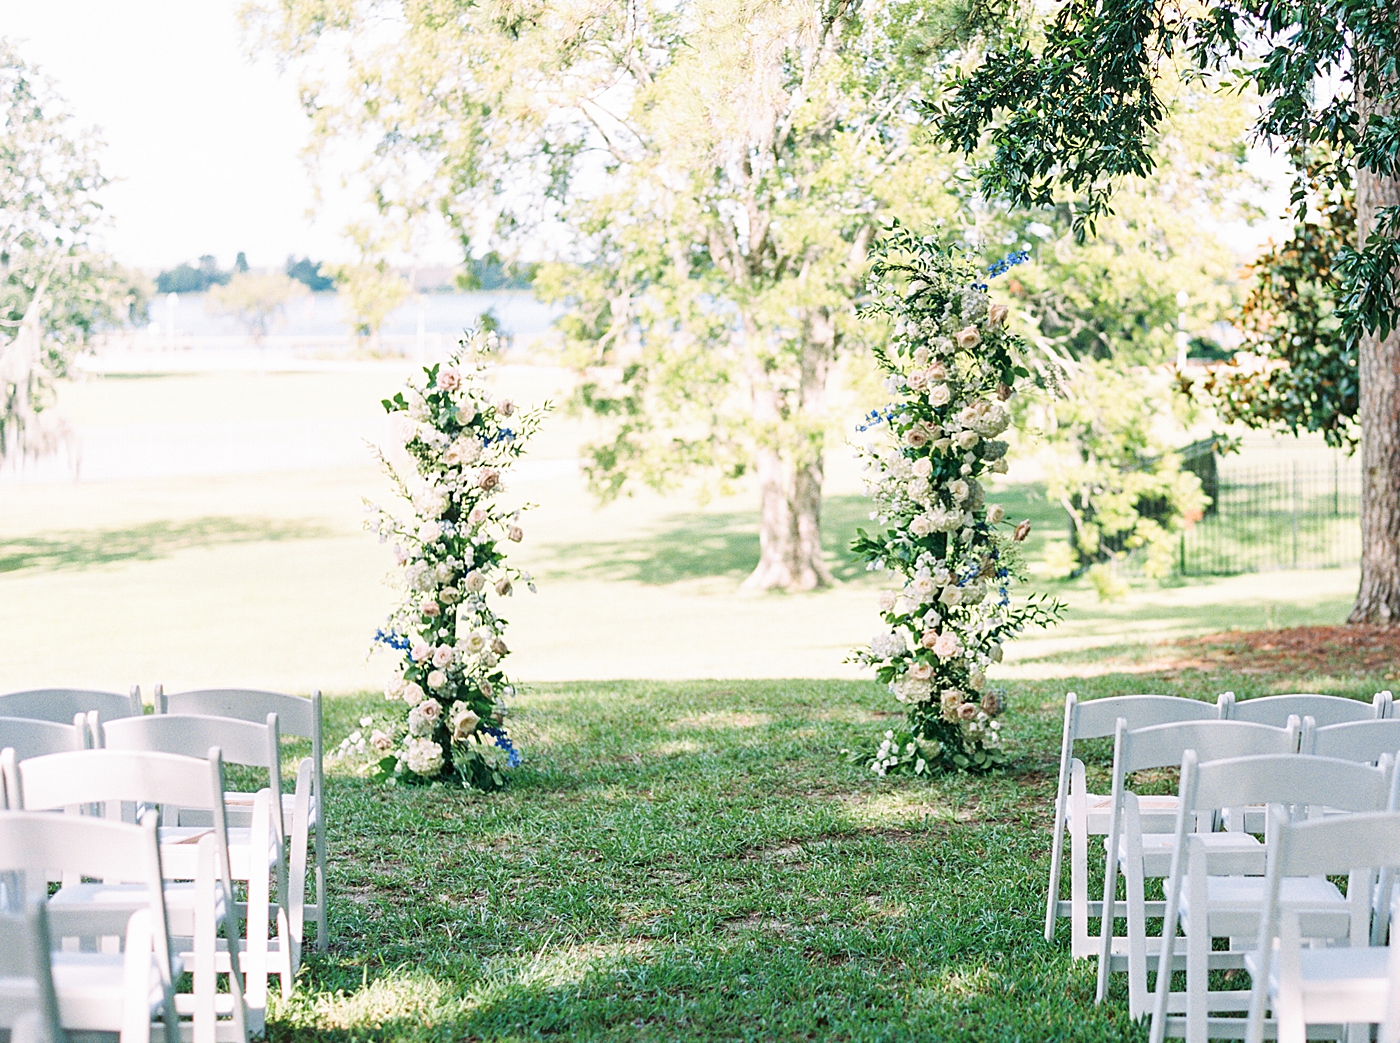 Ceremony setup for outdoor wedding | Images by Annie Laura Photography